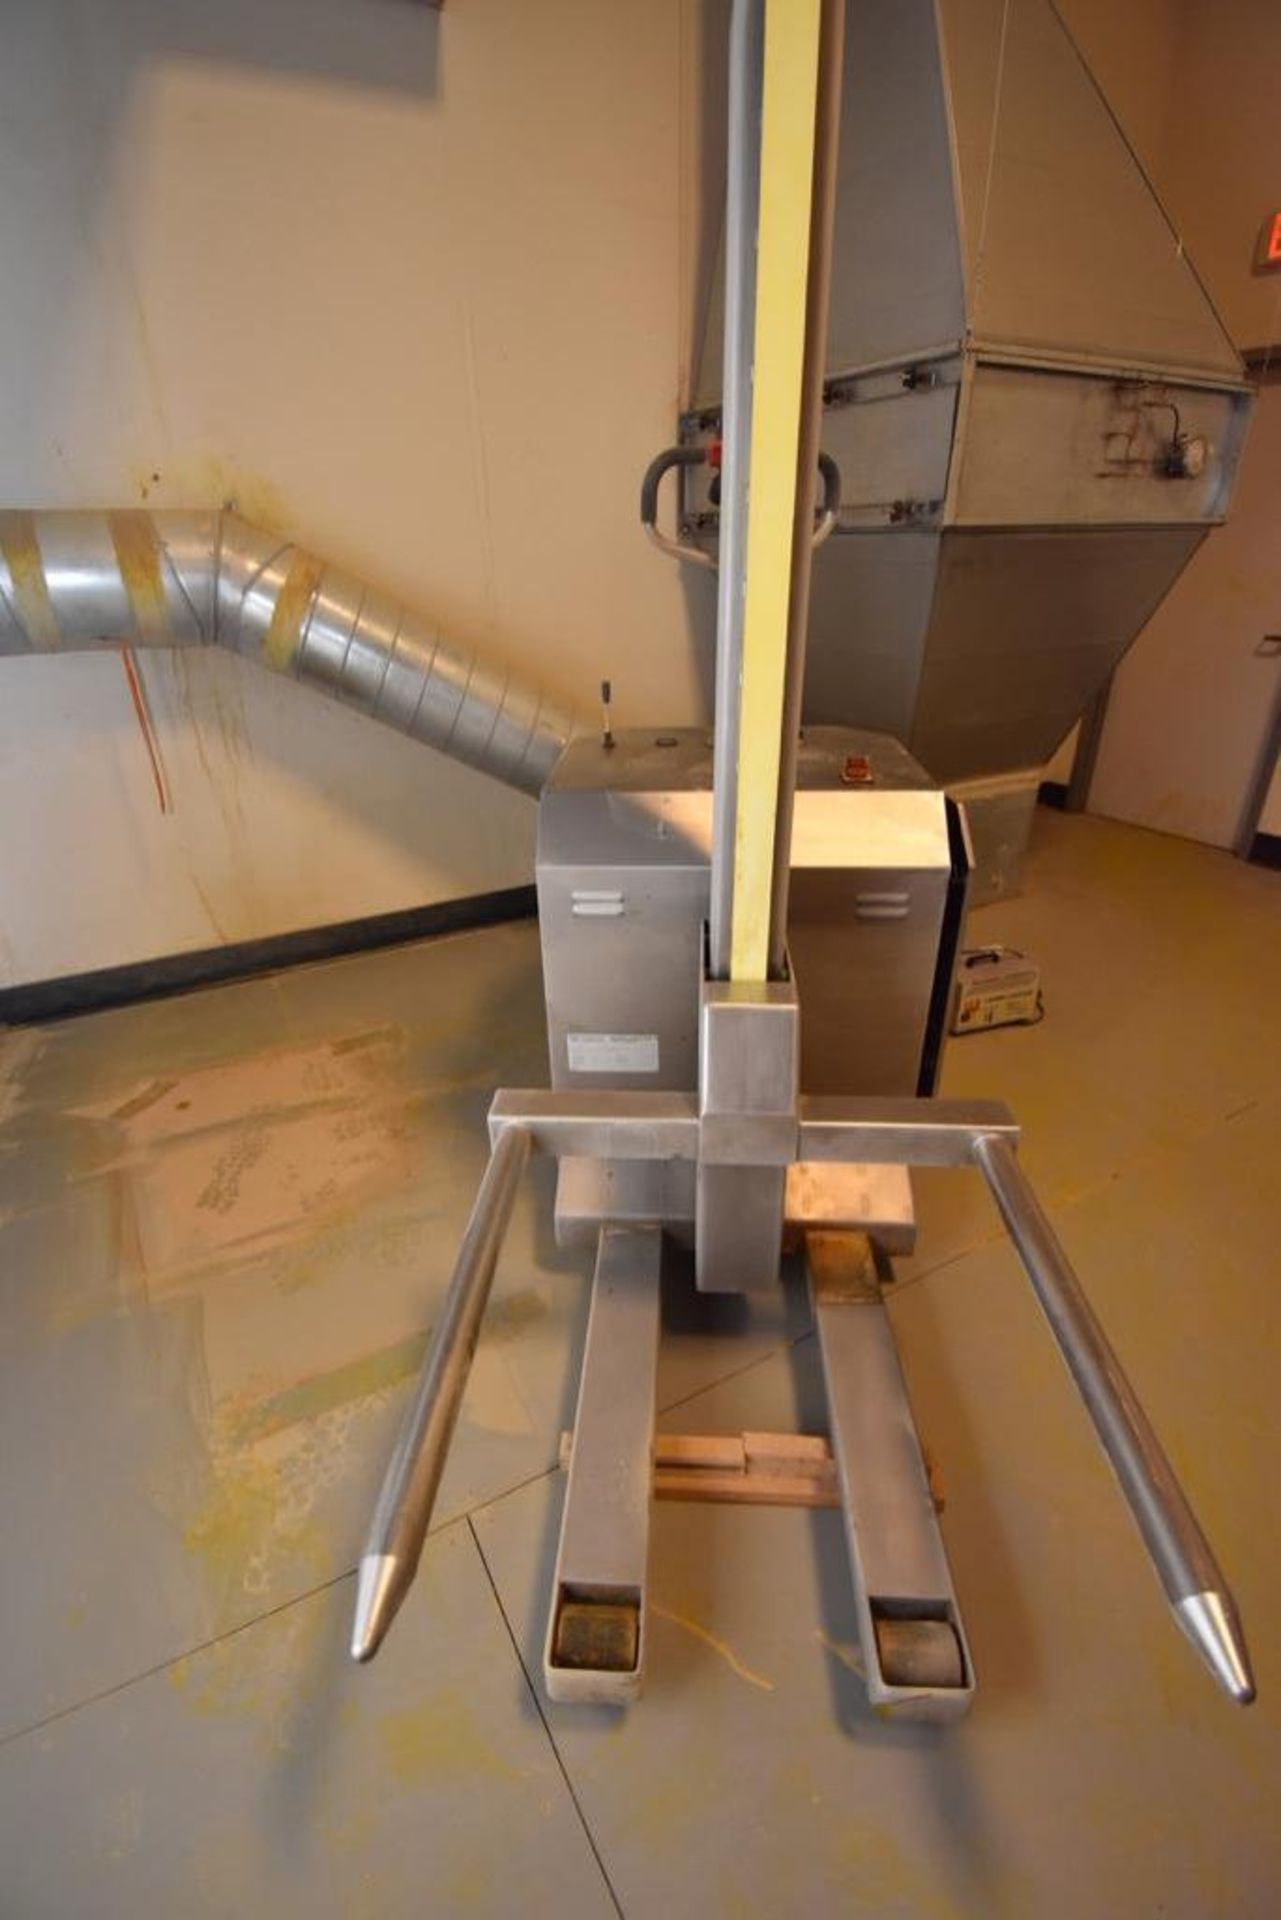 Bohle Telescope Mobile Lifter PTH 400 with Blender Sieve and Tote - Image 2 of 16